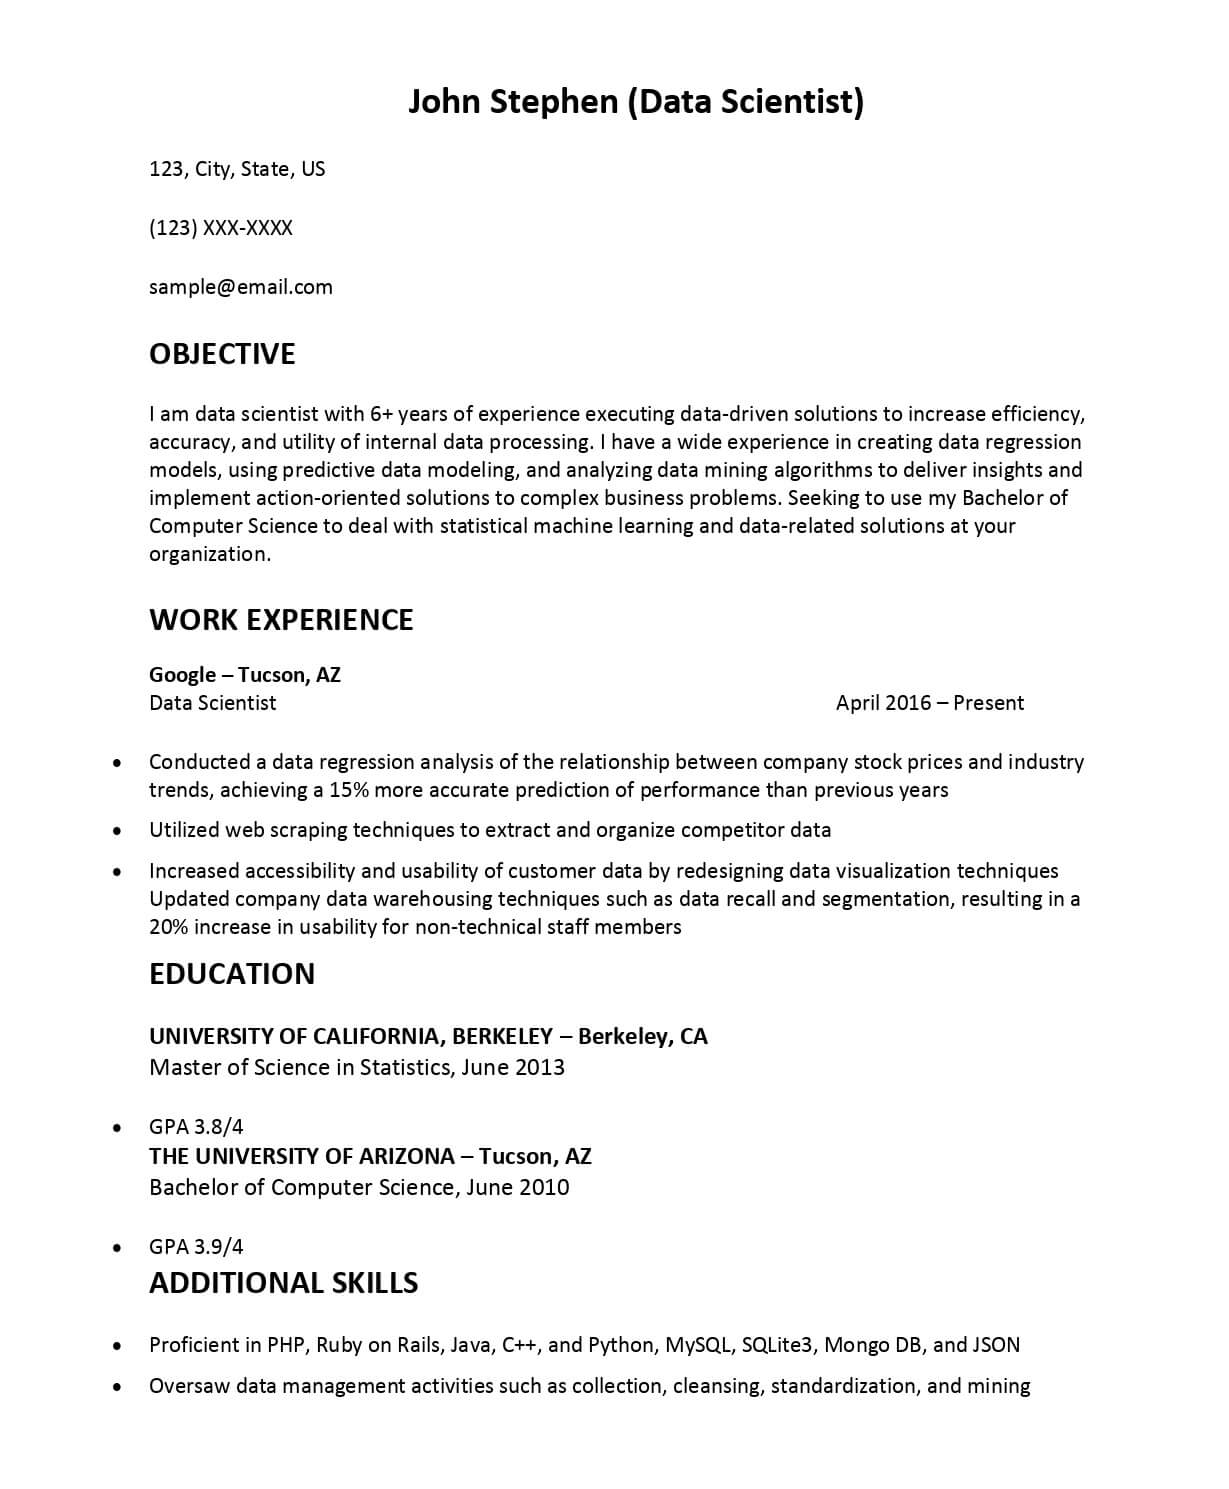 How to Write an Effective Data Scientist Resume